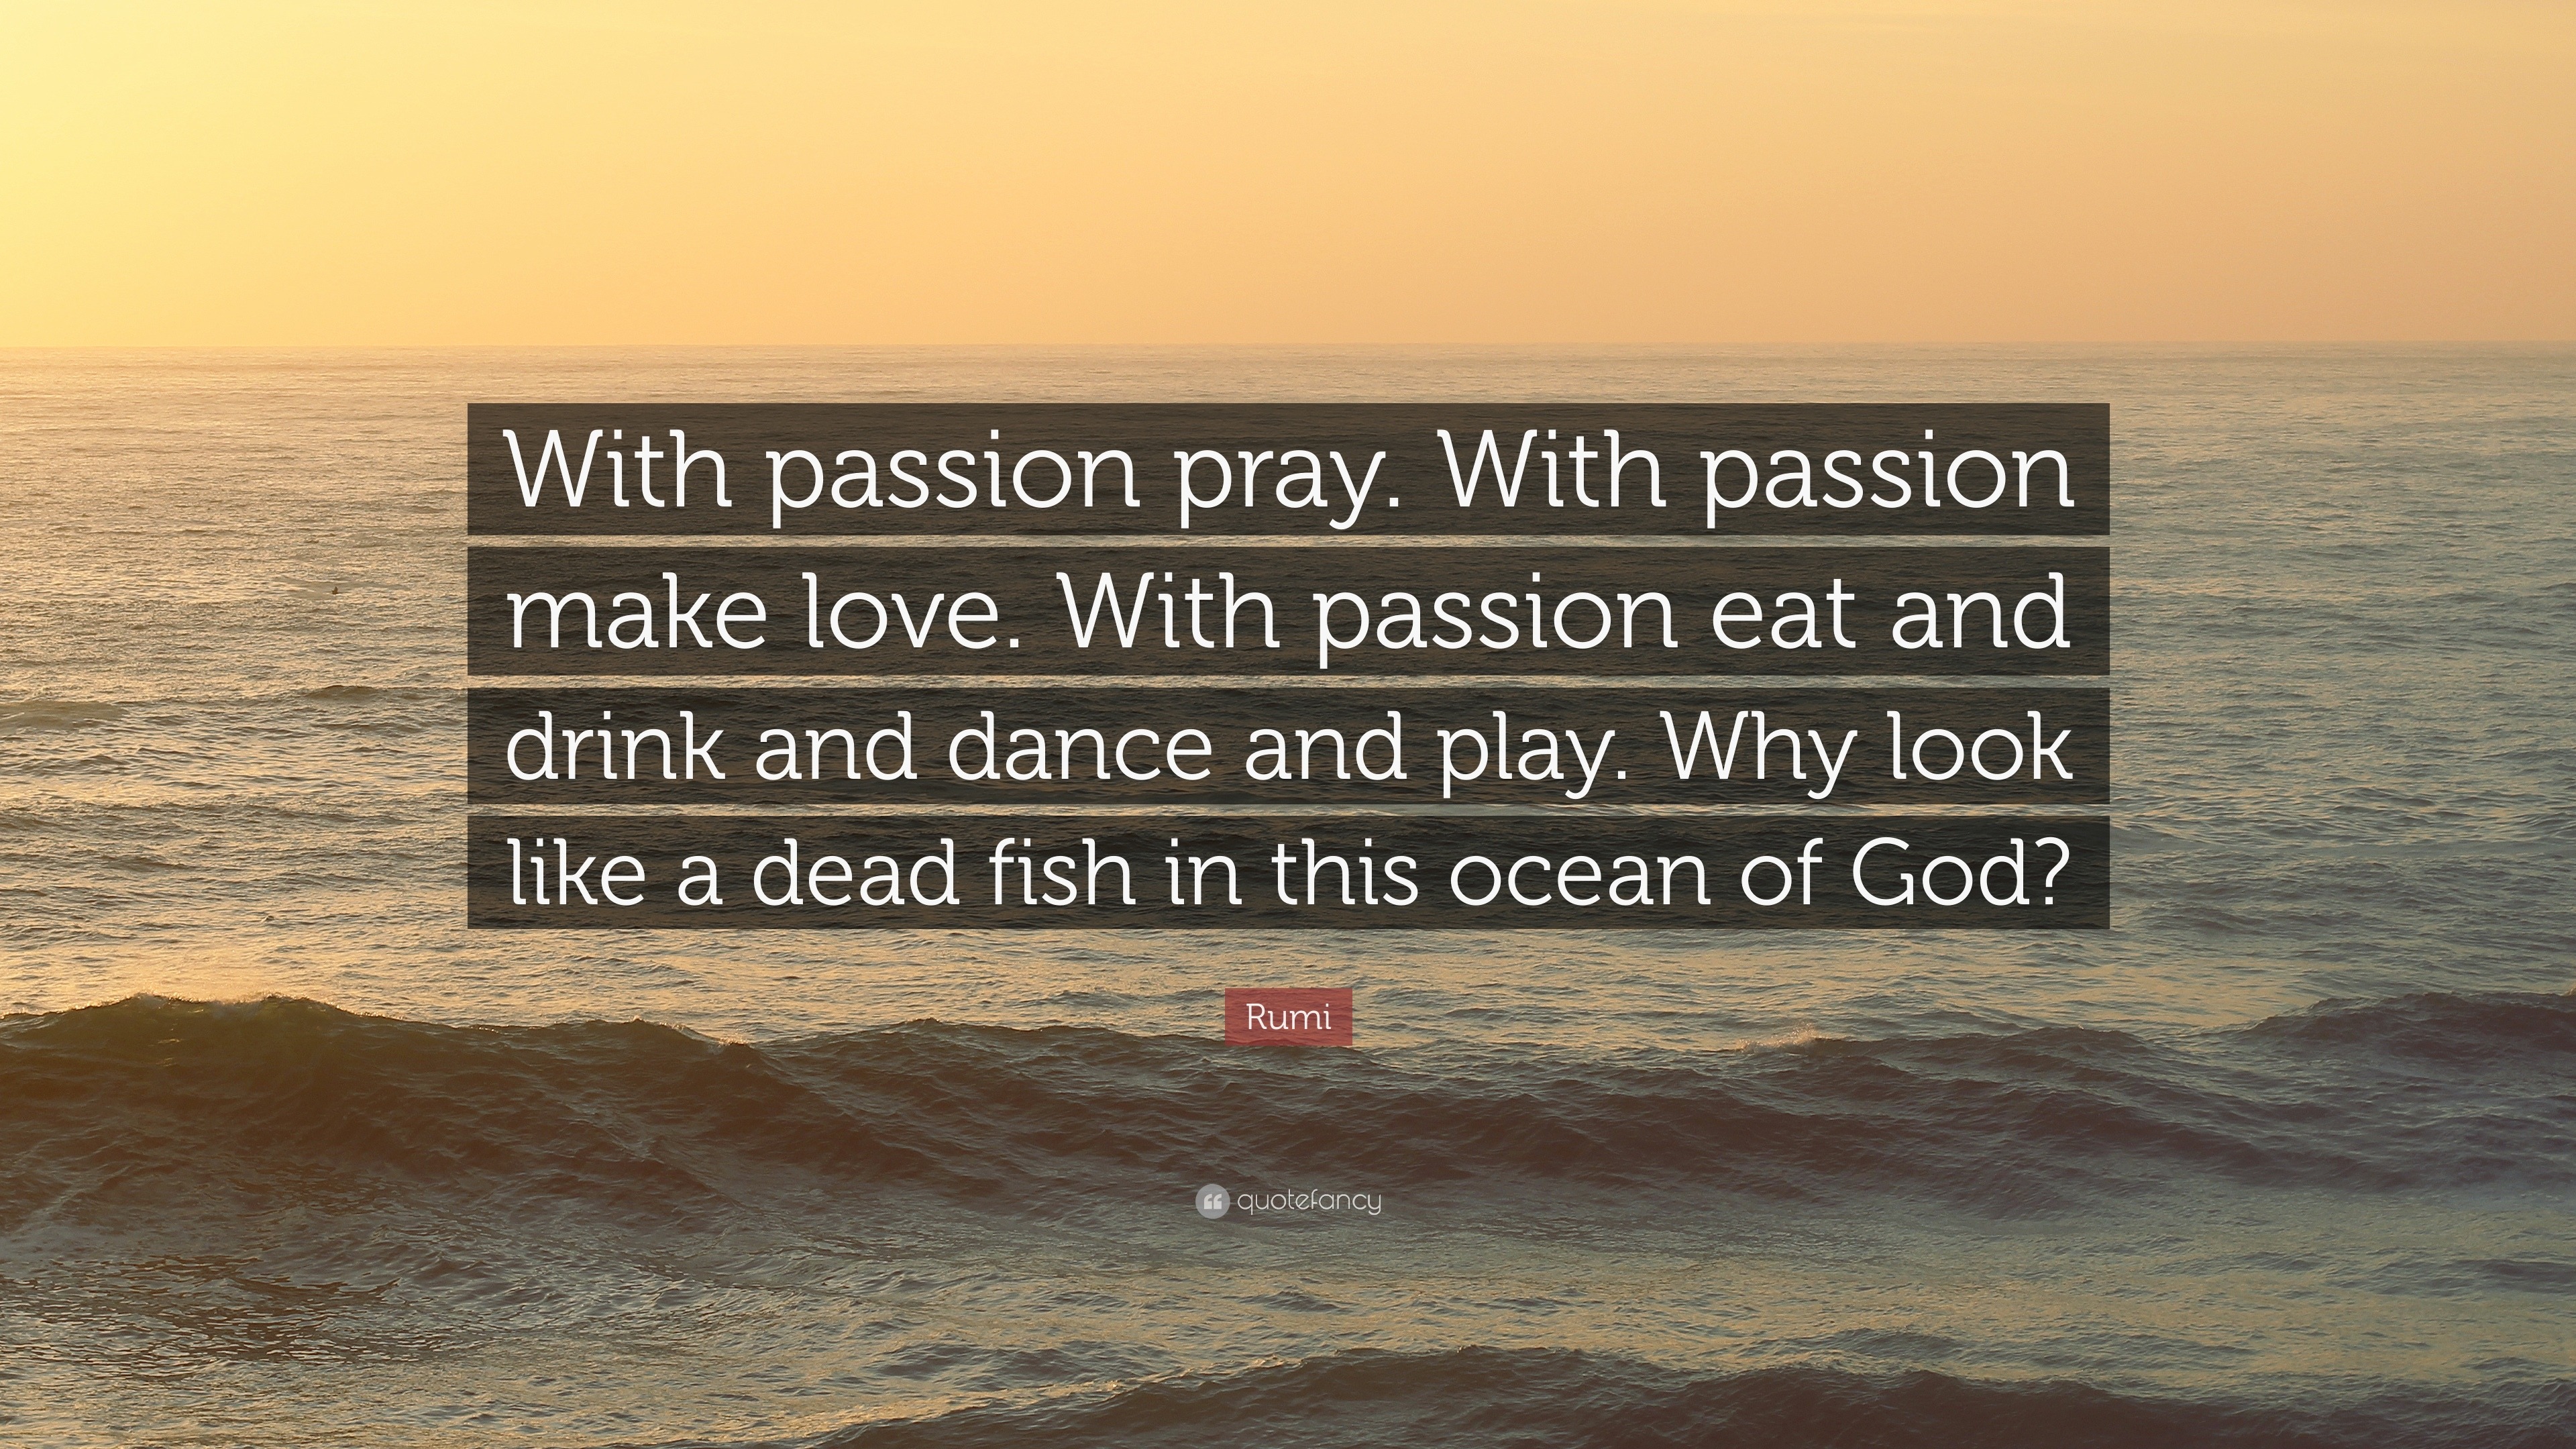 Rumi Quote “With passion pray With passion make love With passion eat